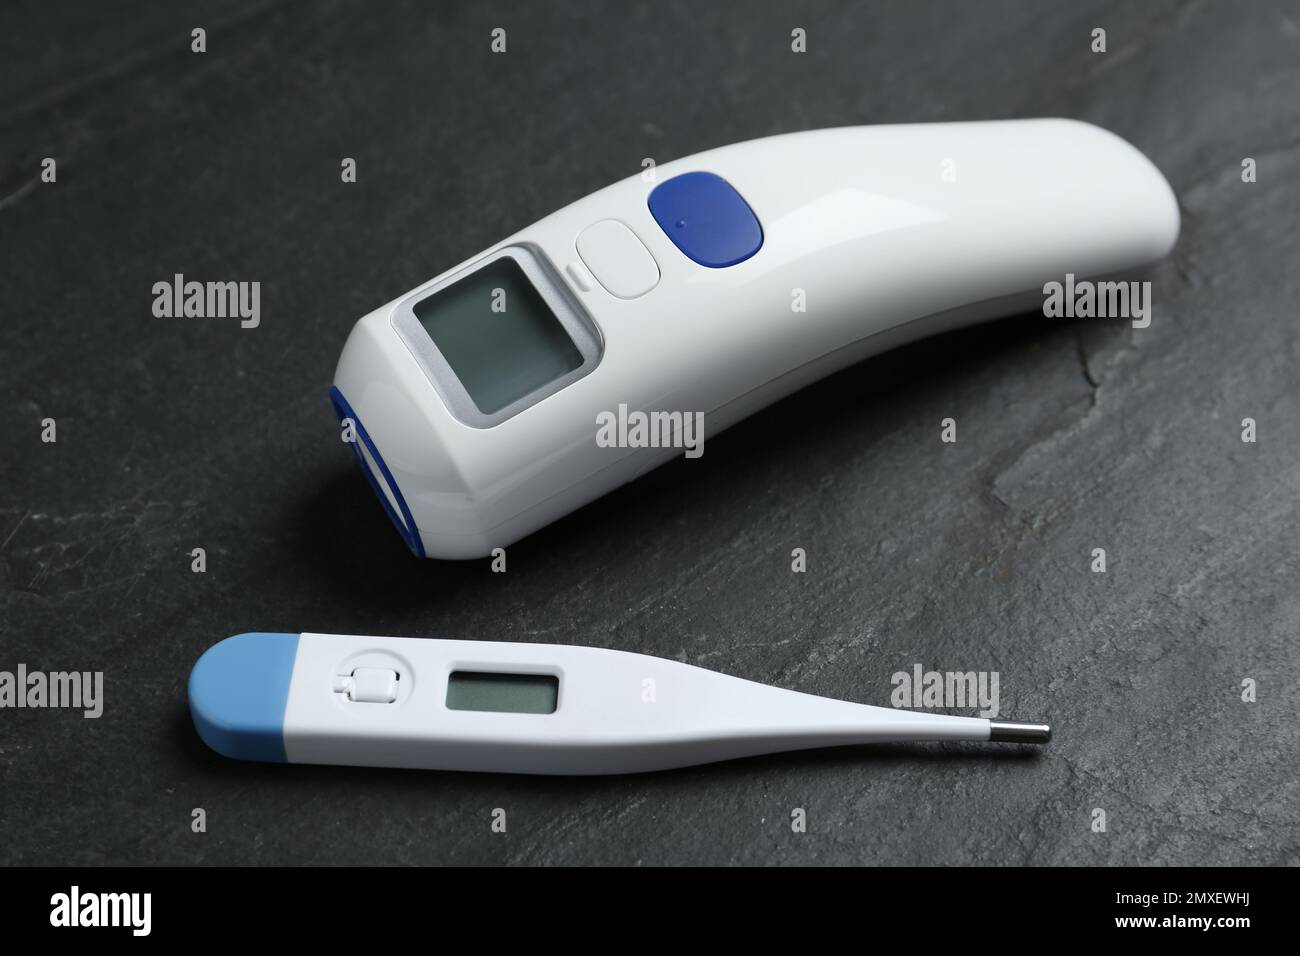 https://c8.alamy.com/comp/2MXEWHJ/non-contact-infrared-and-digital-thermometers-on-black-slate-background-2MXEWHJ.jpg